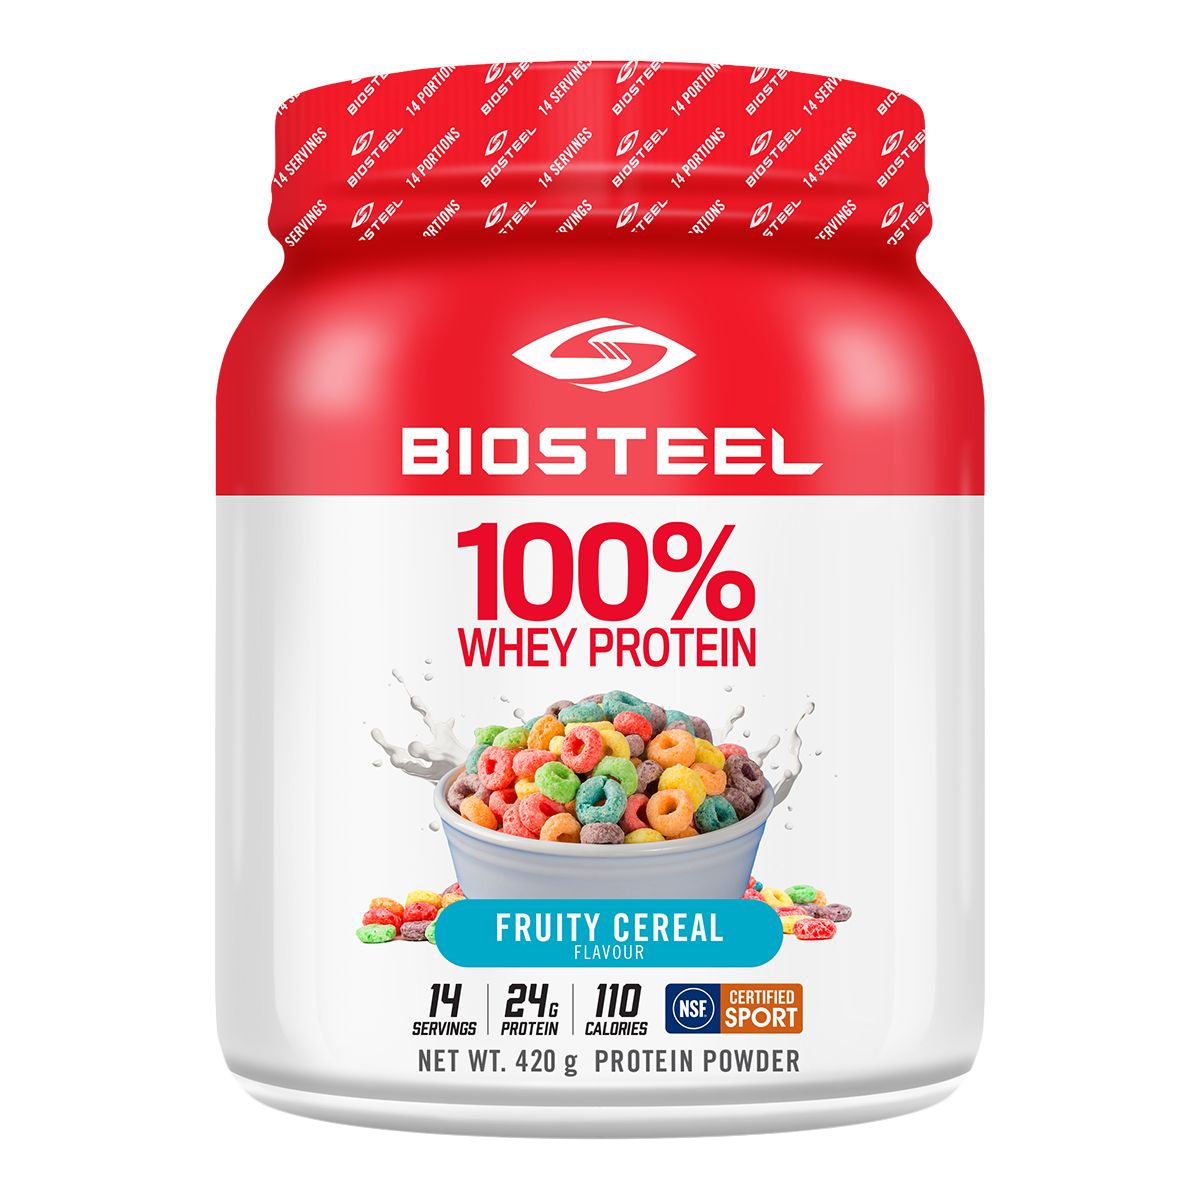 Image of BioSteel Fruity Cereal 100% Whey Protein Powder 420g 